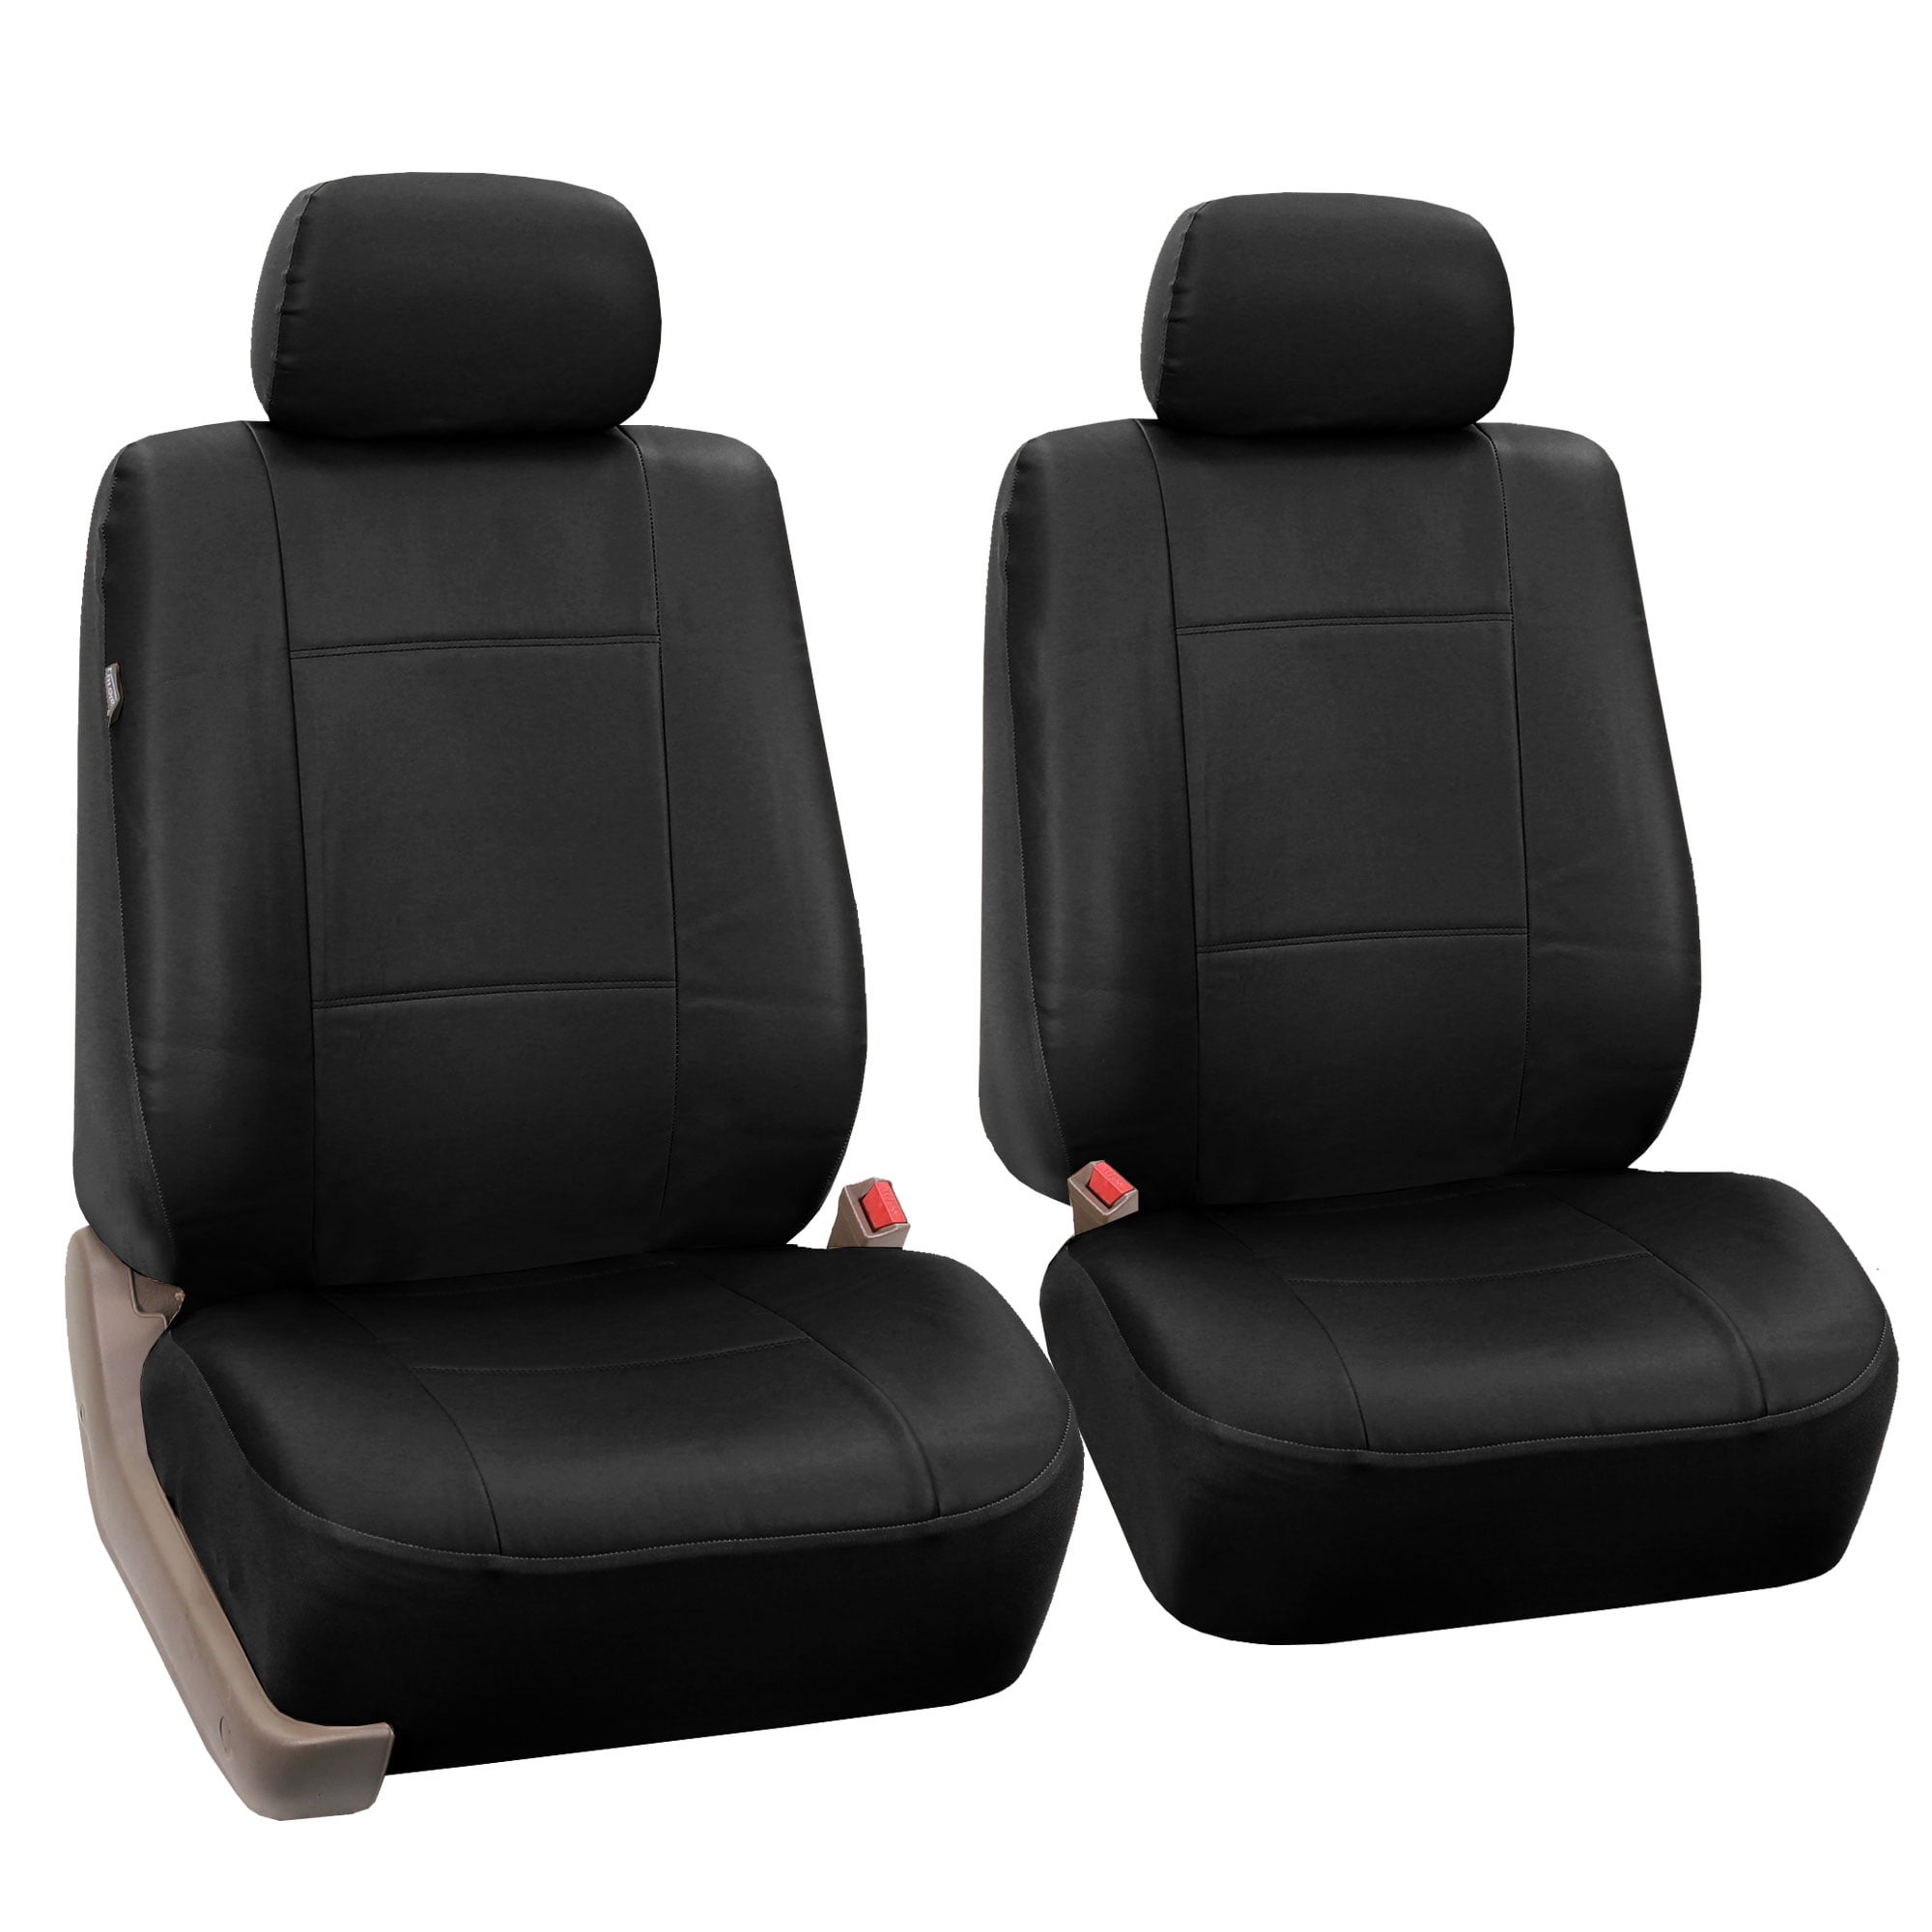 Car Van Front Seat Cover Protective Protector Waterresistant Airbag Friendly P1 